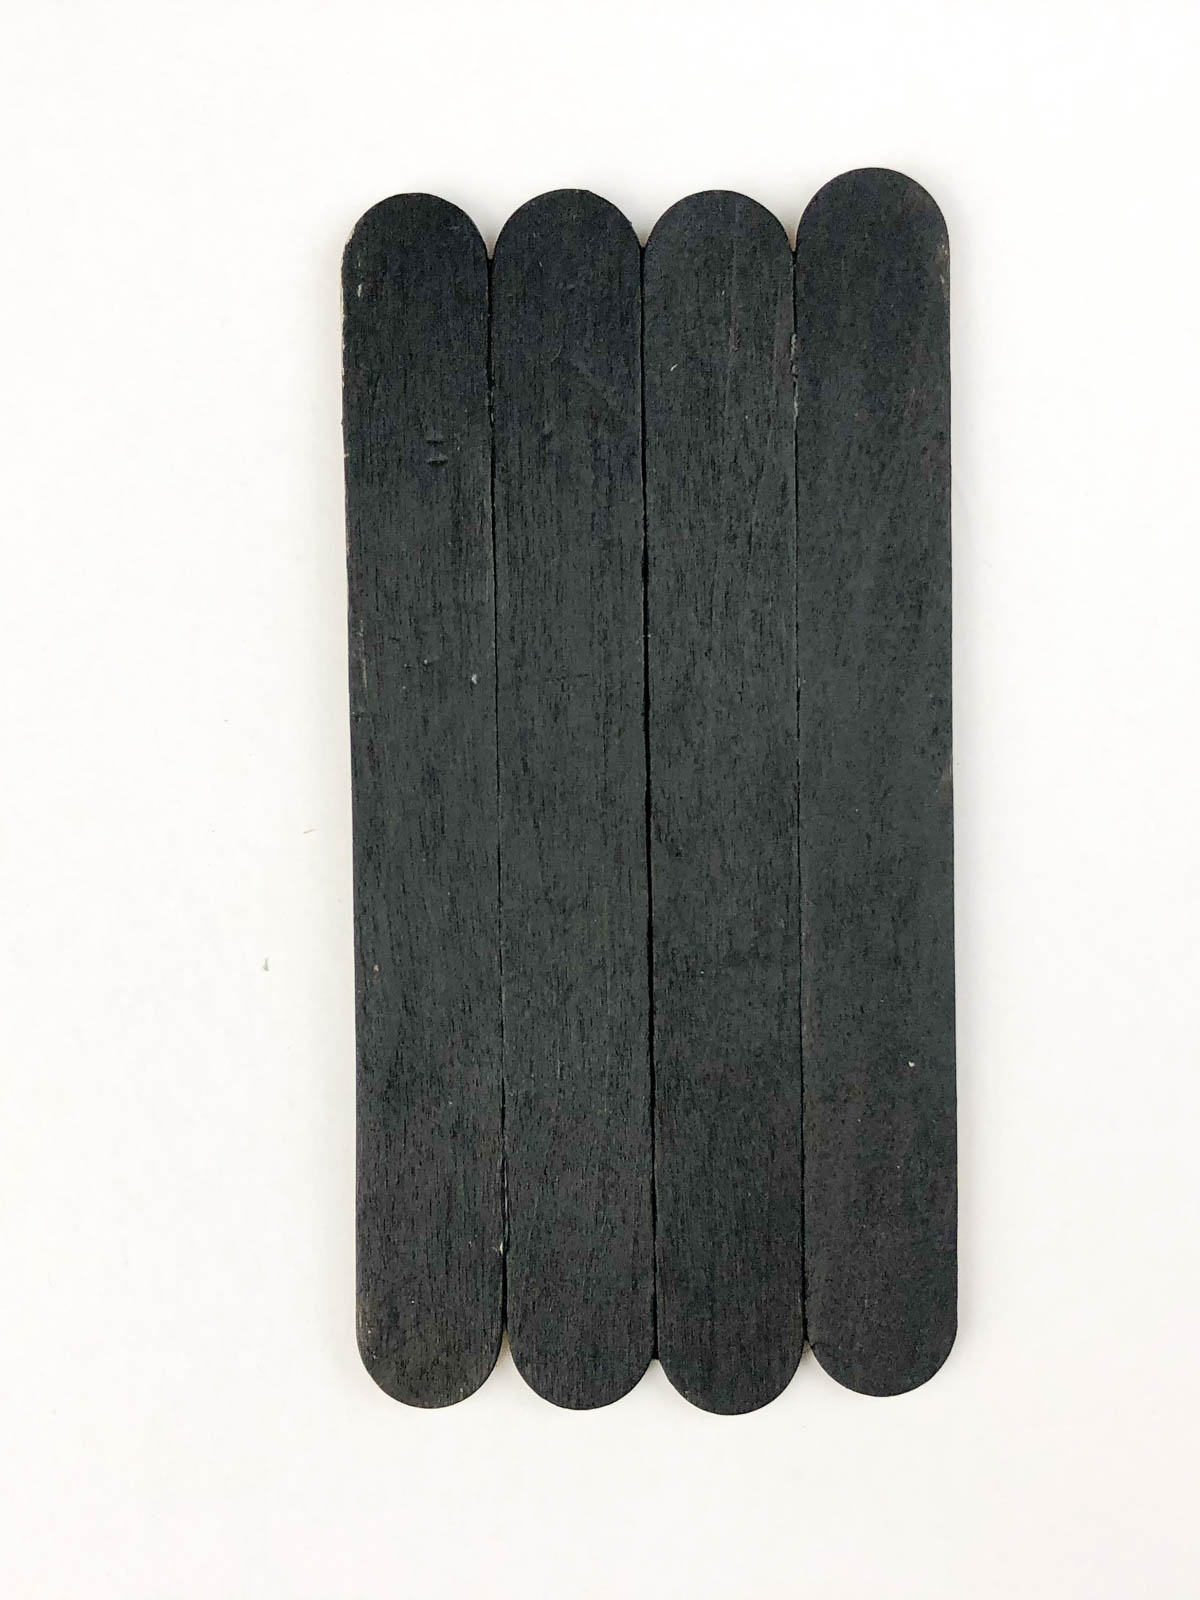 popsicle sticks that are painted black